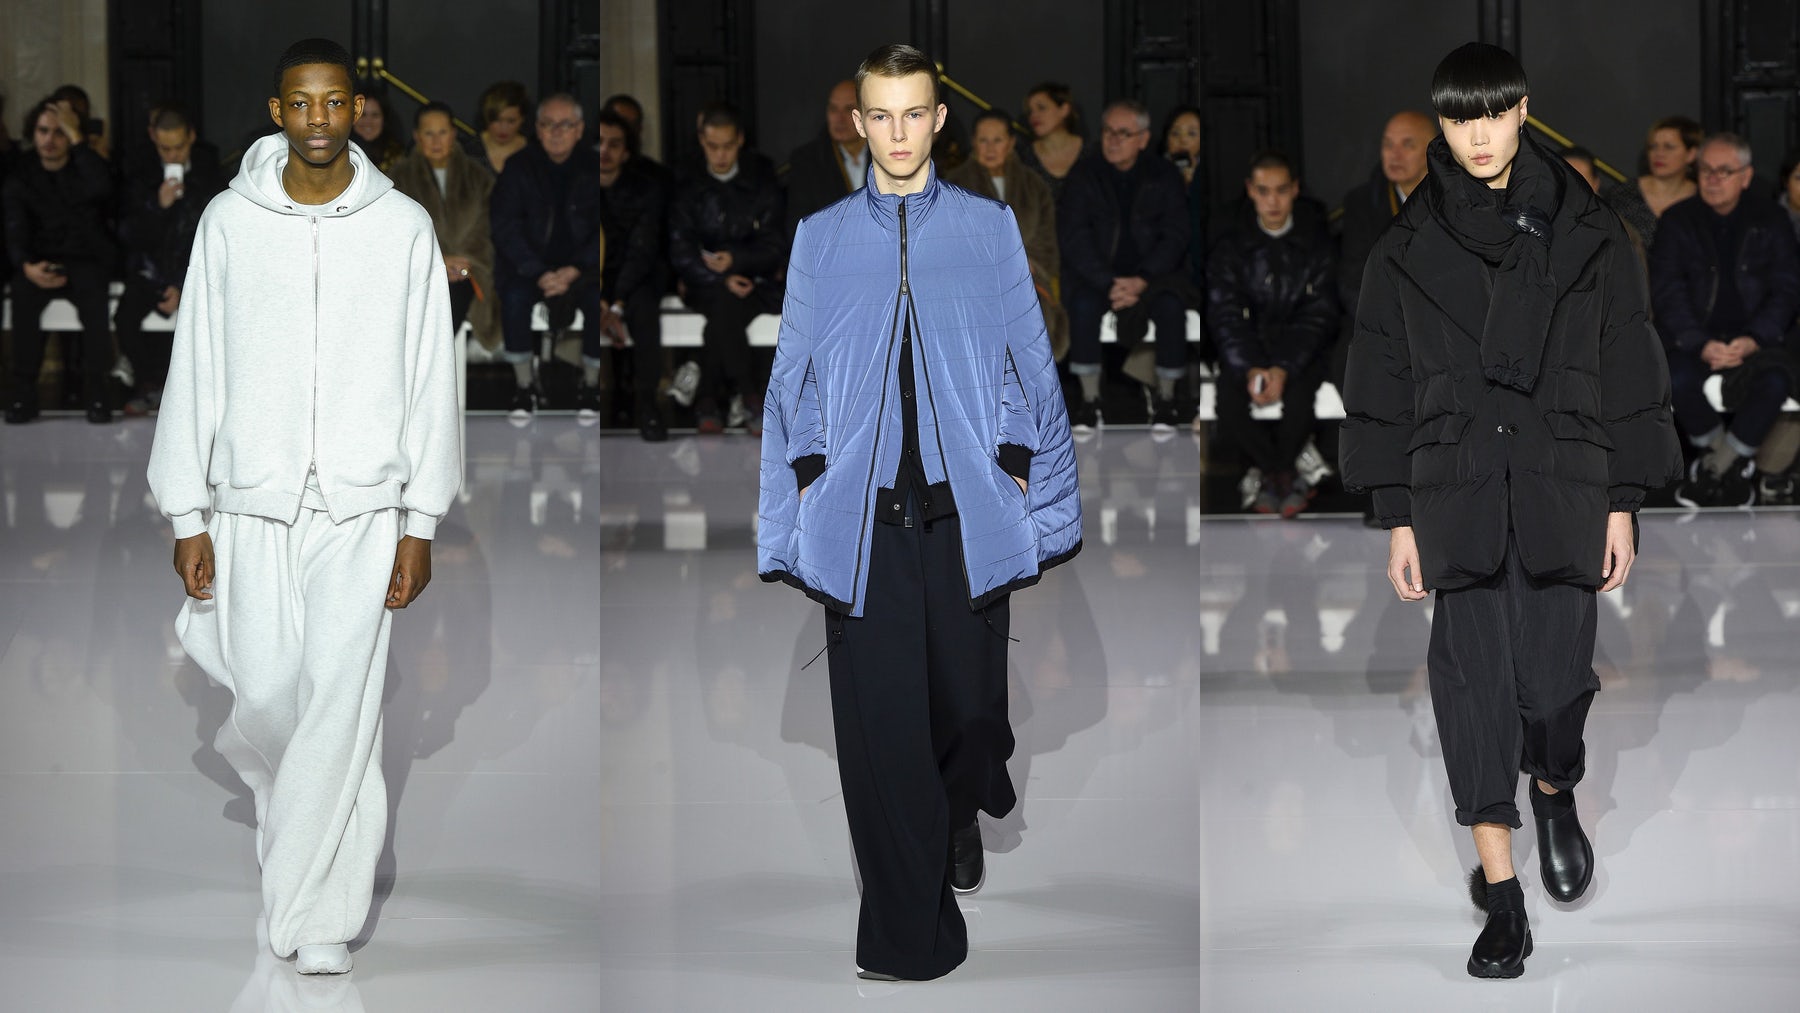 A New Formality and Its Opposite | Fashion Show Review, Multiple, Menswear – Autumn 2019